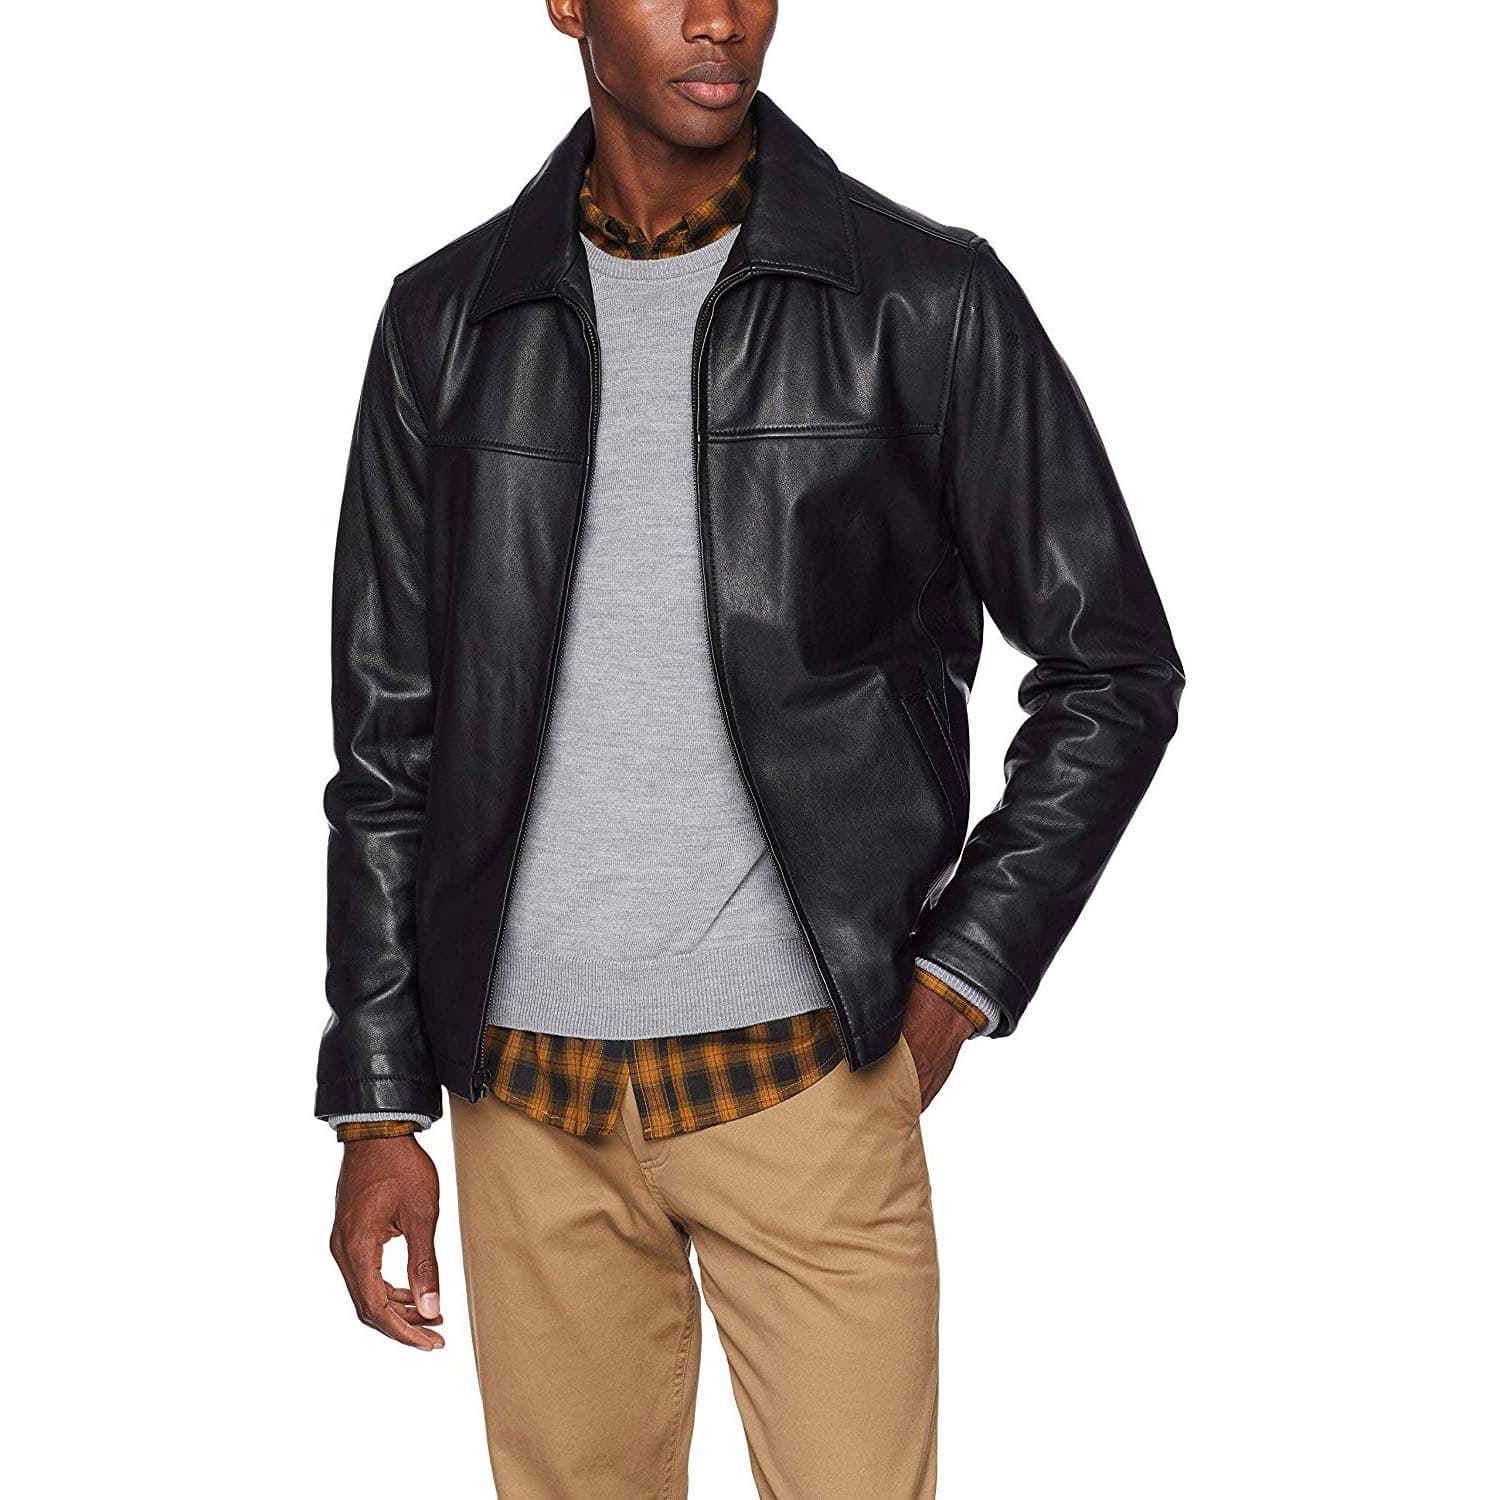 Top 10 Best Black Leather Jacket Mens in 2021 Review